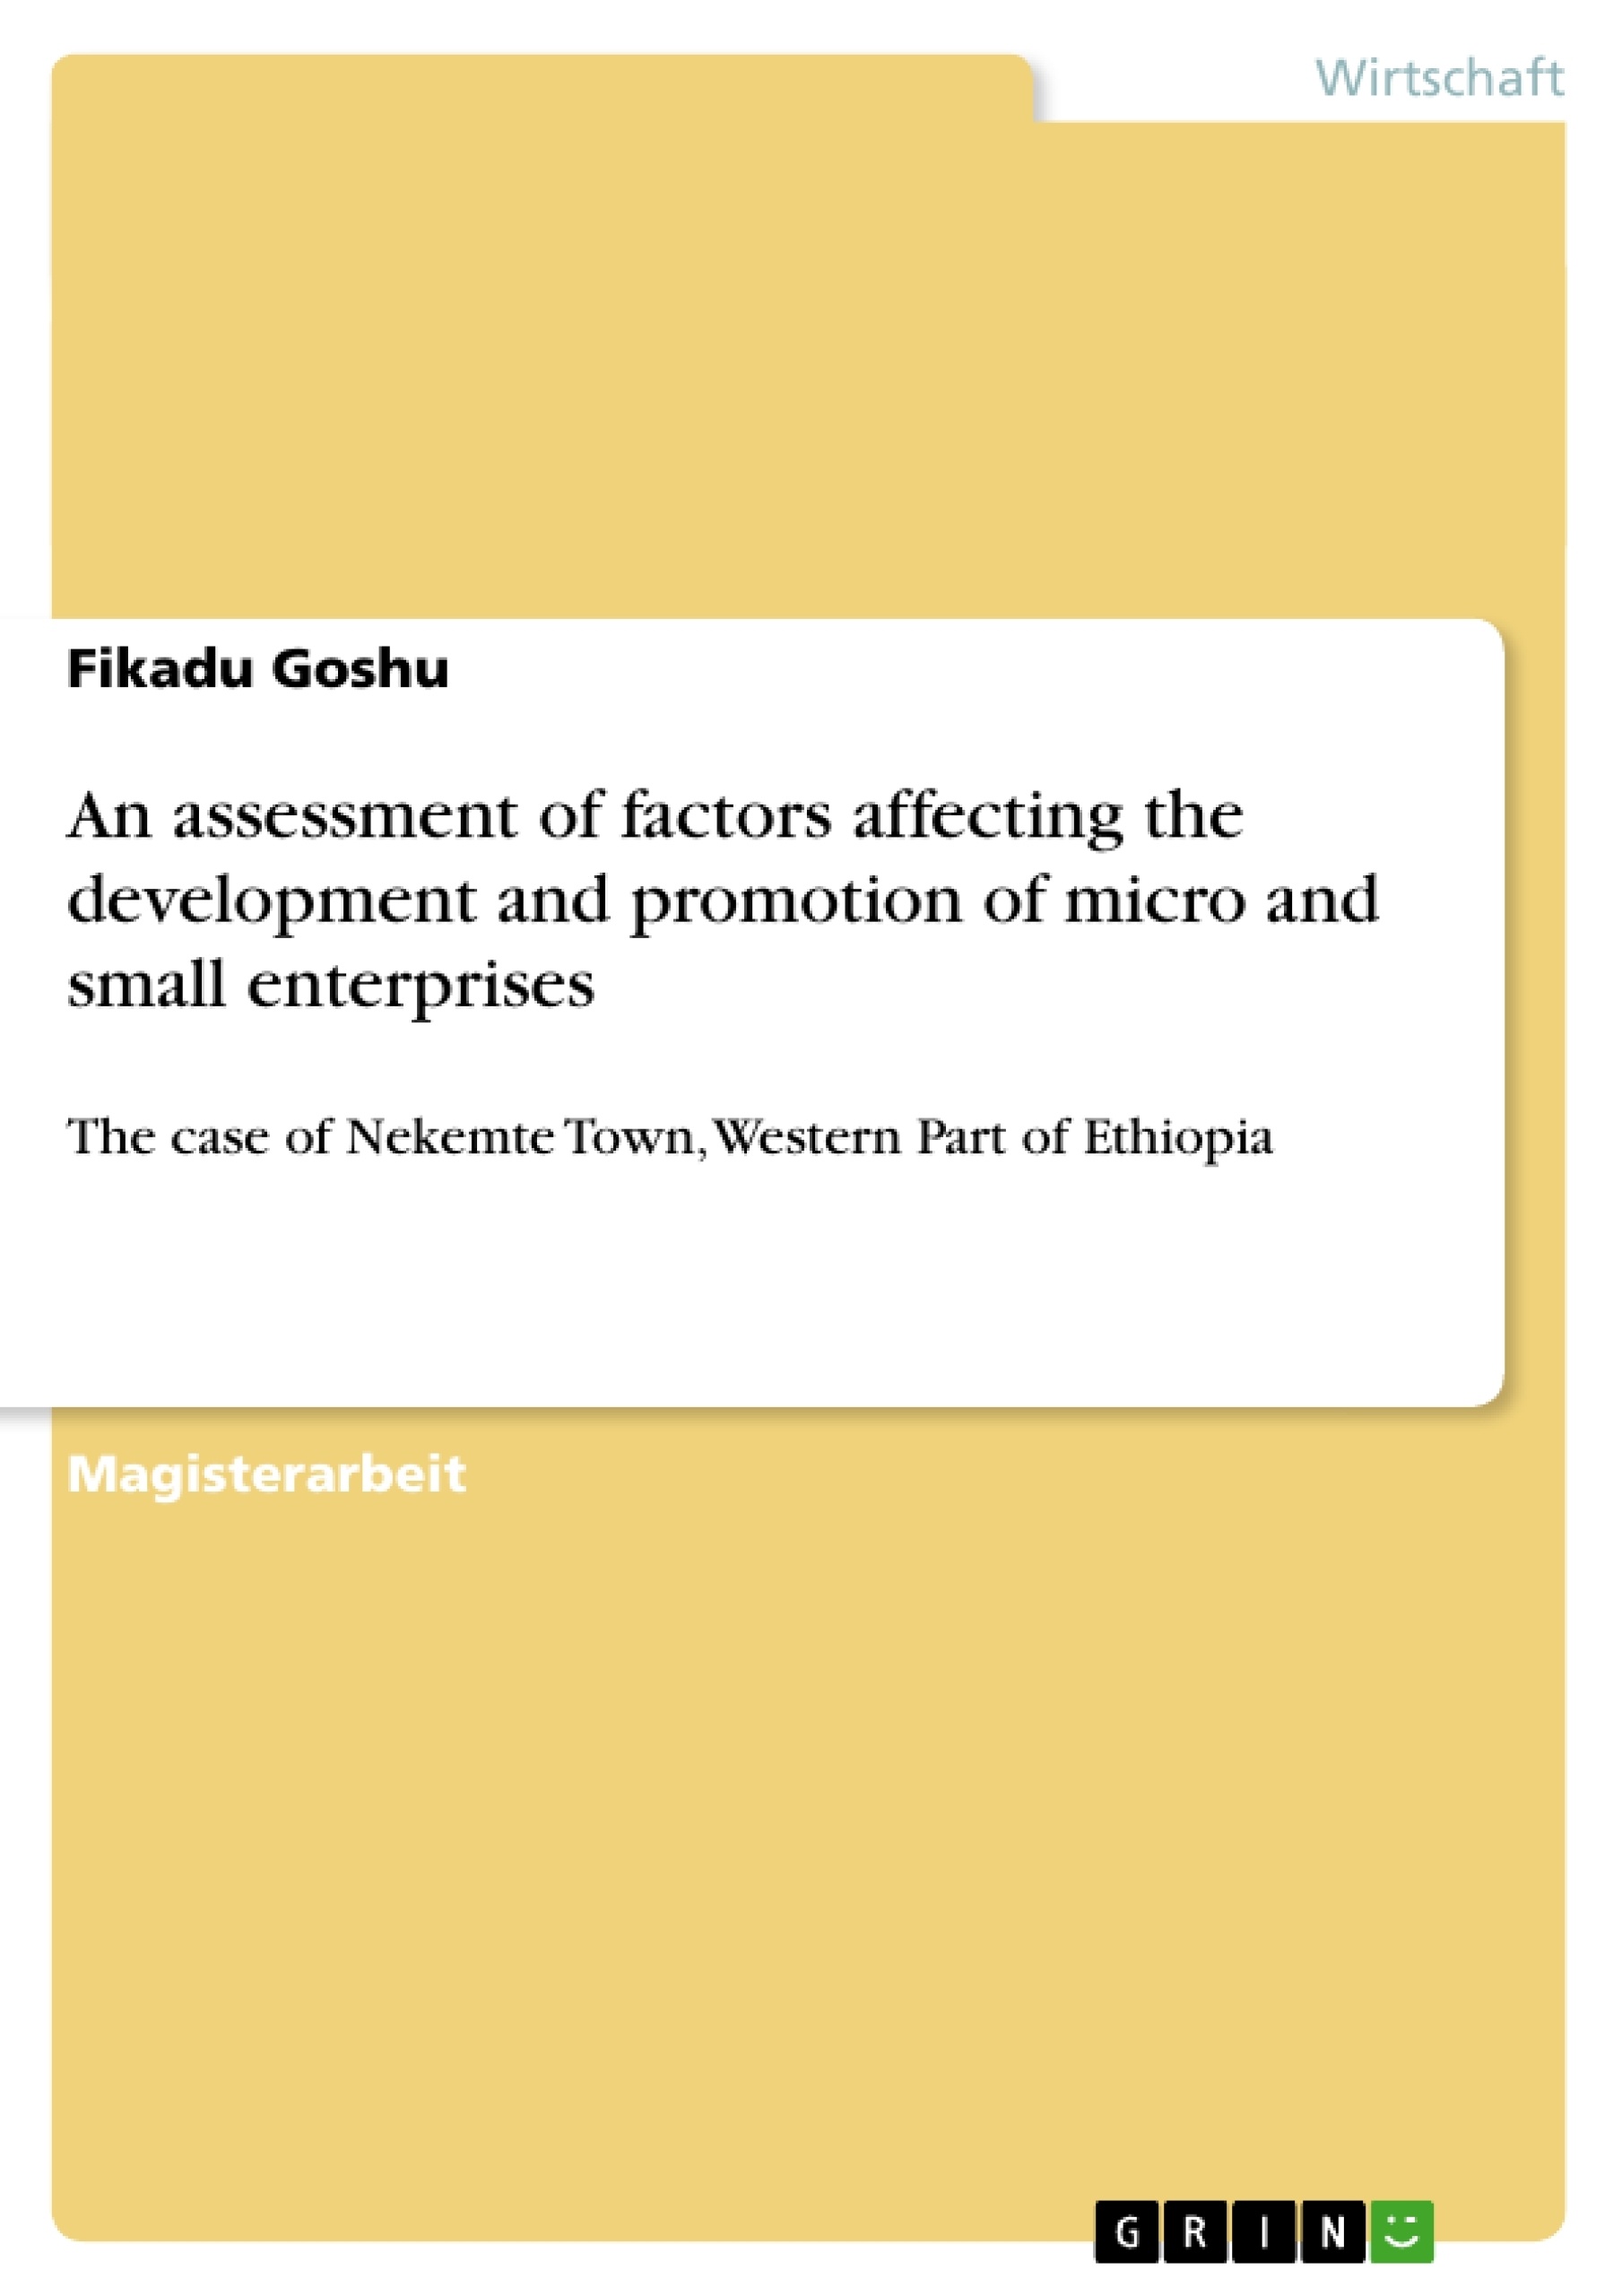 Titel: An assessment of factors affecting the development and promotion of micro and small enterprises